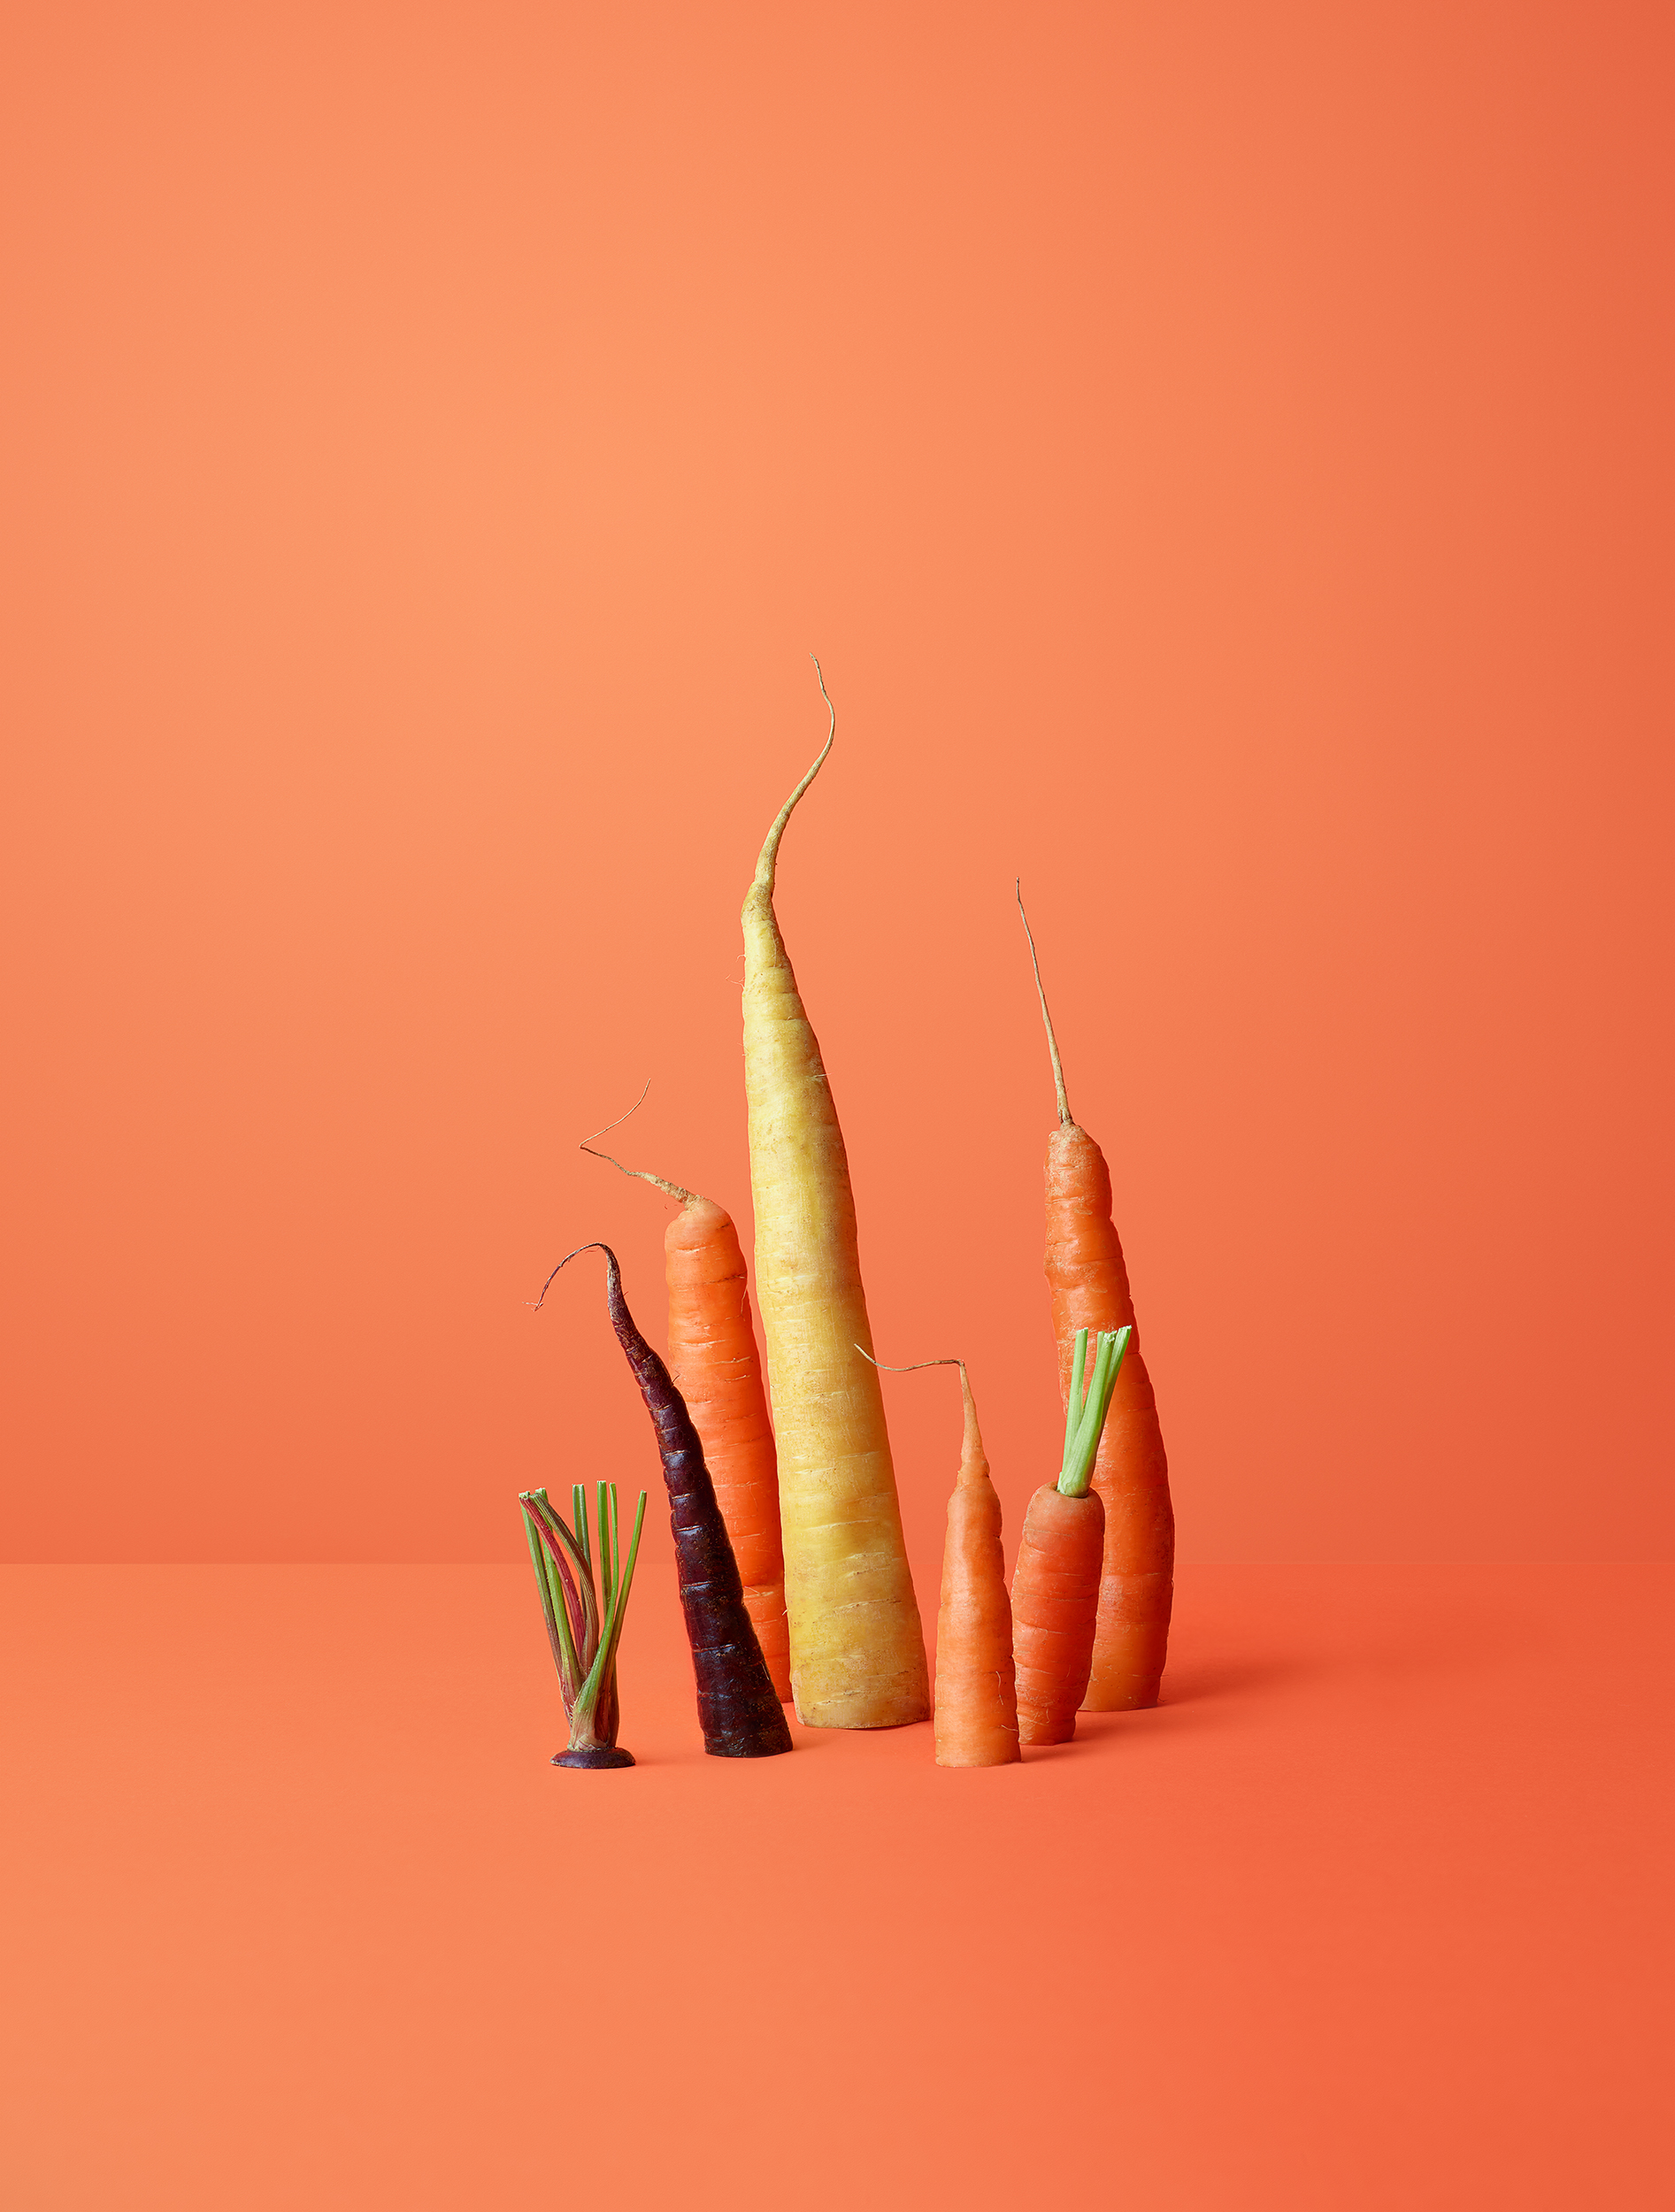 Chelsea Bloxsome | Food Photographer London Carrot Final